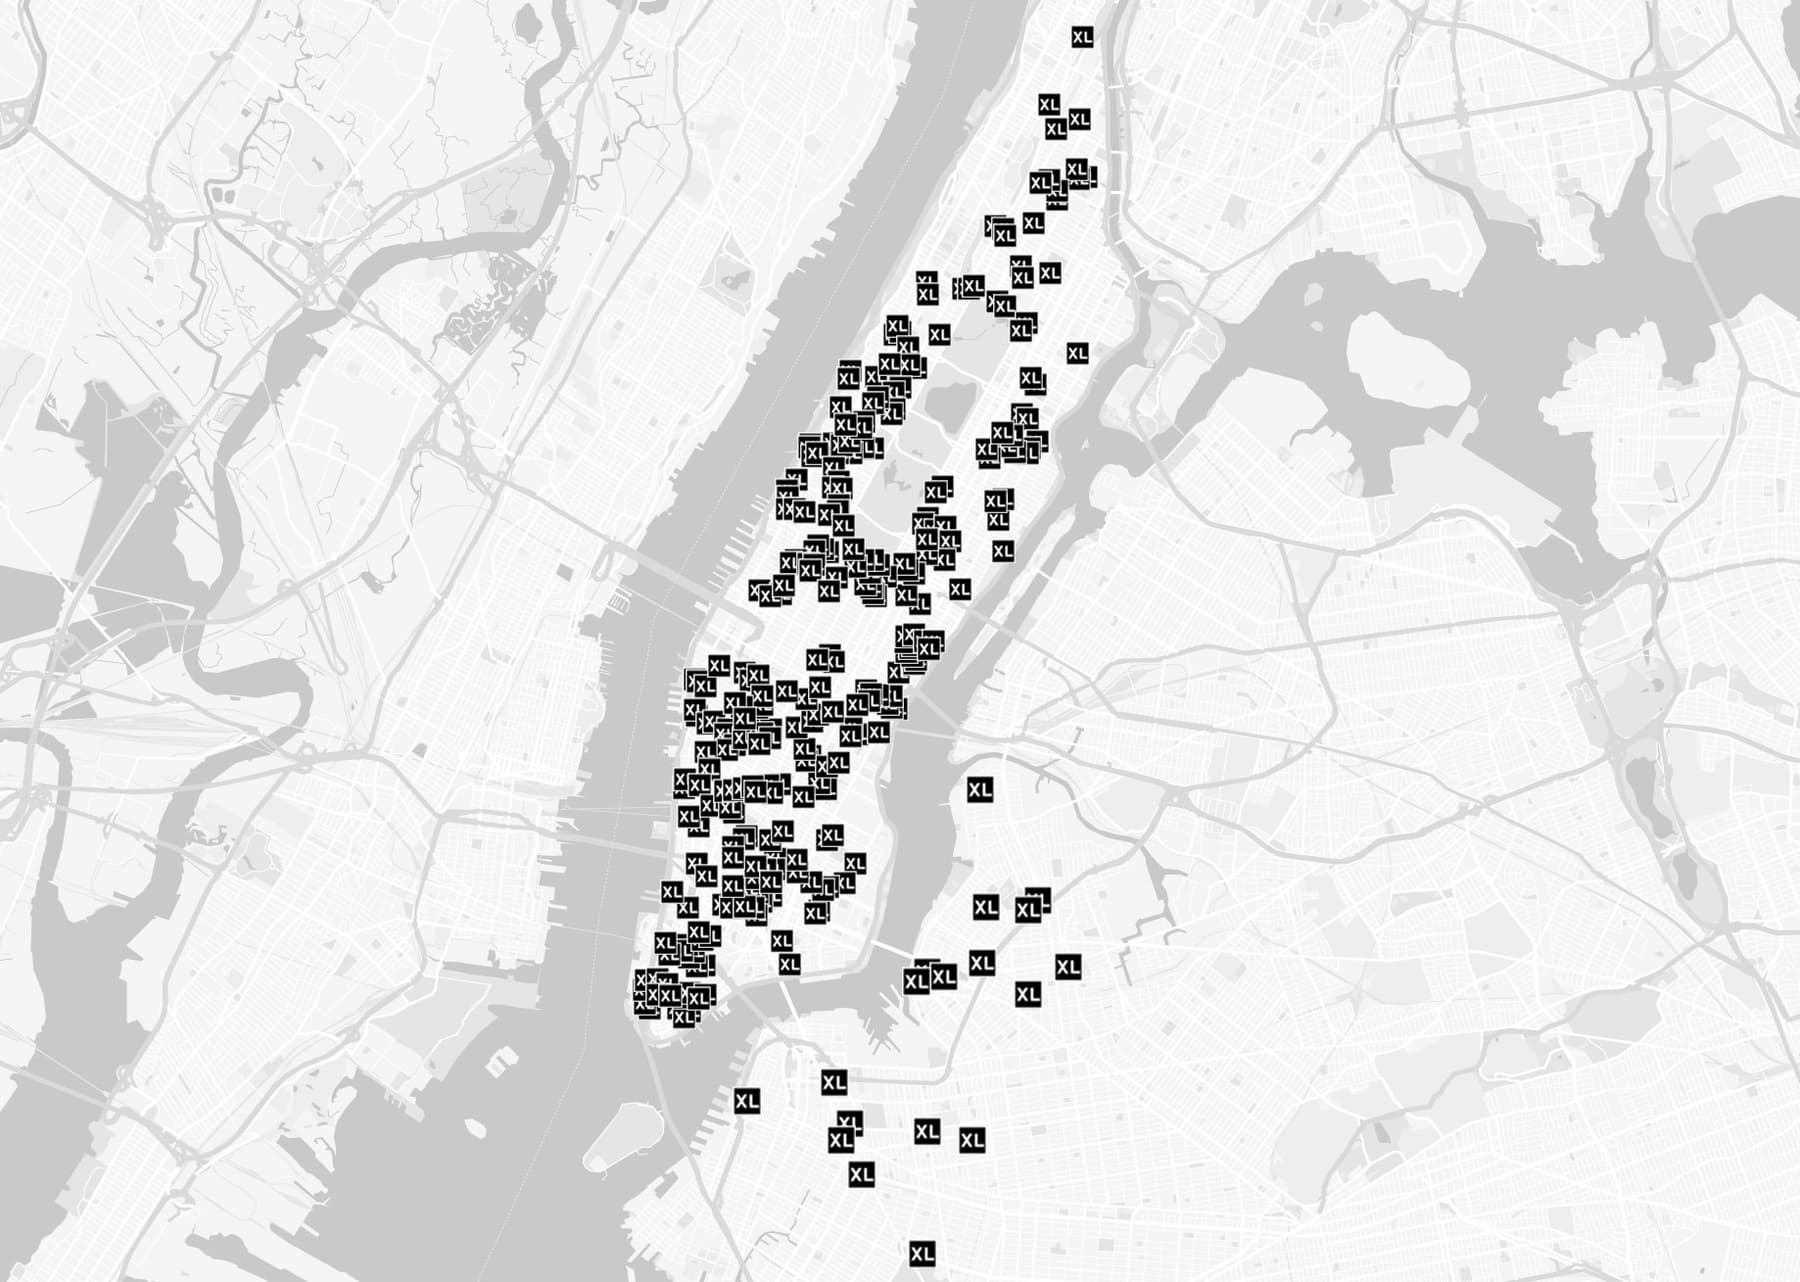 presence-map-xl-rpm-nyc-property-management